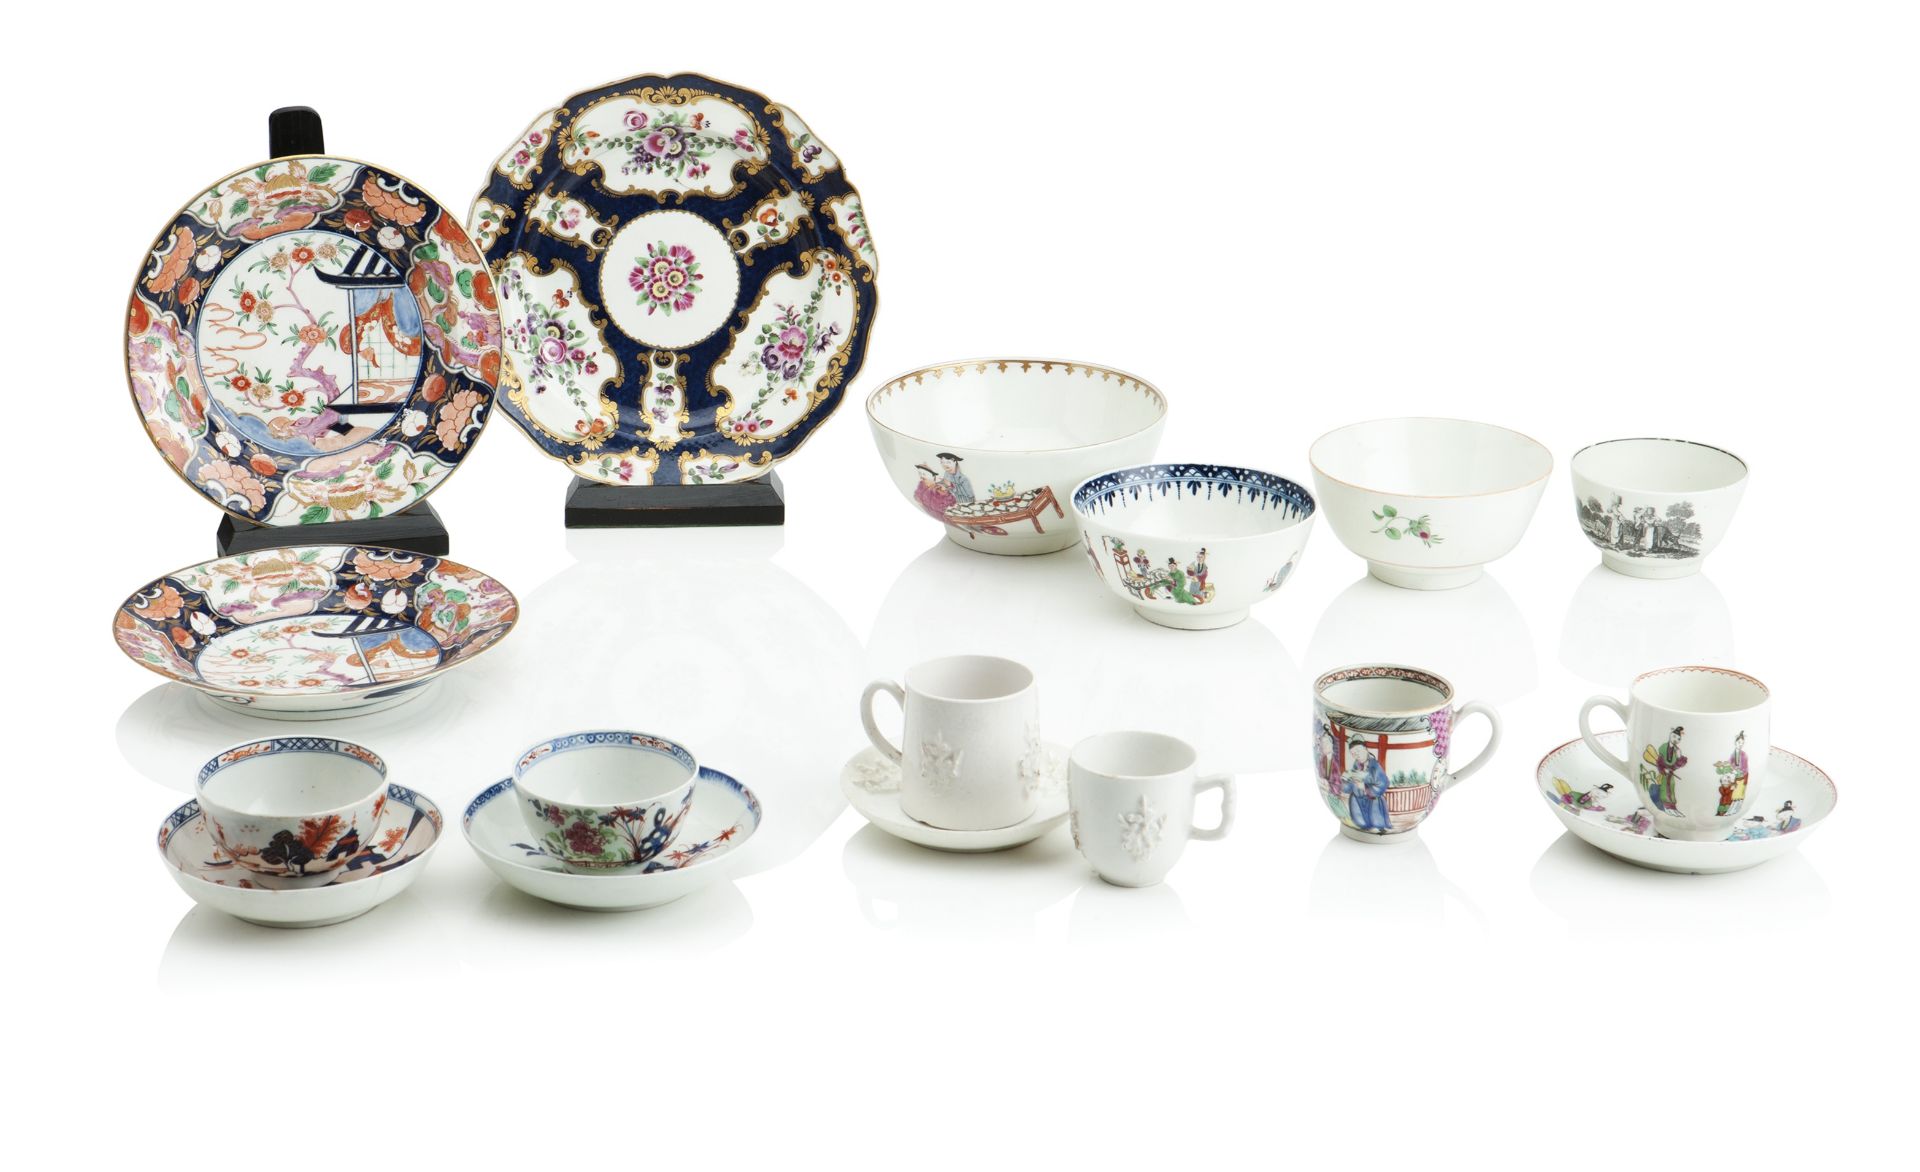 A COLLECTION OF ENGLISH POLYCHROME PORCELAIN 18th century